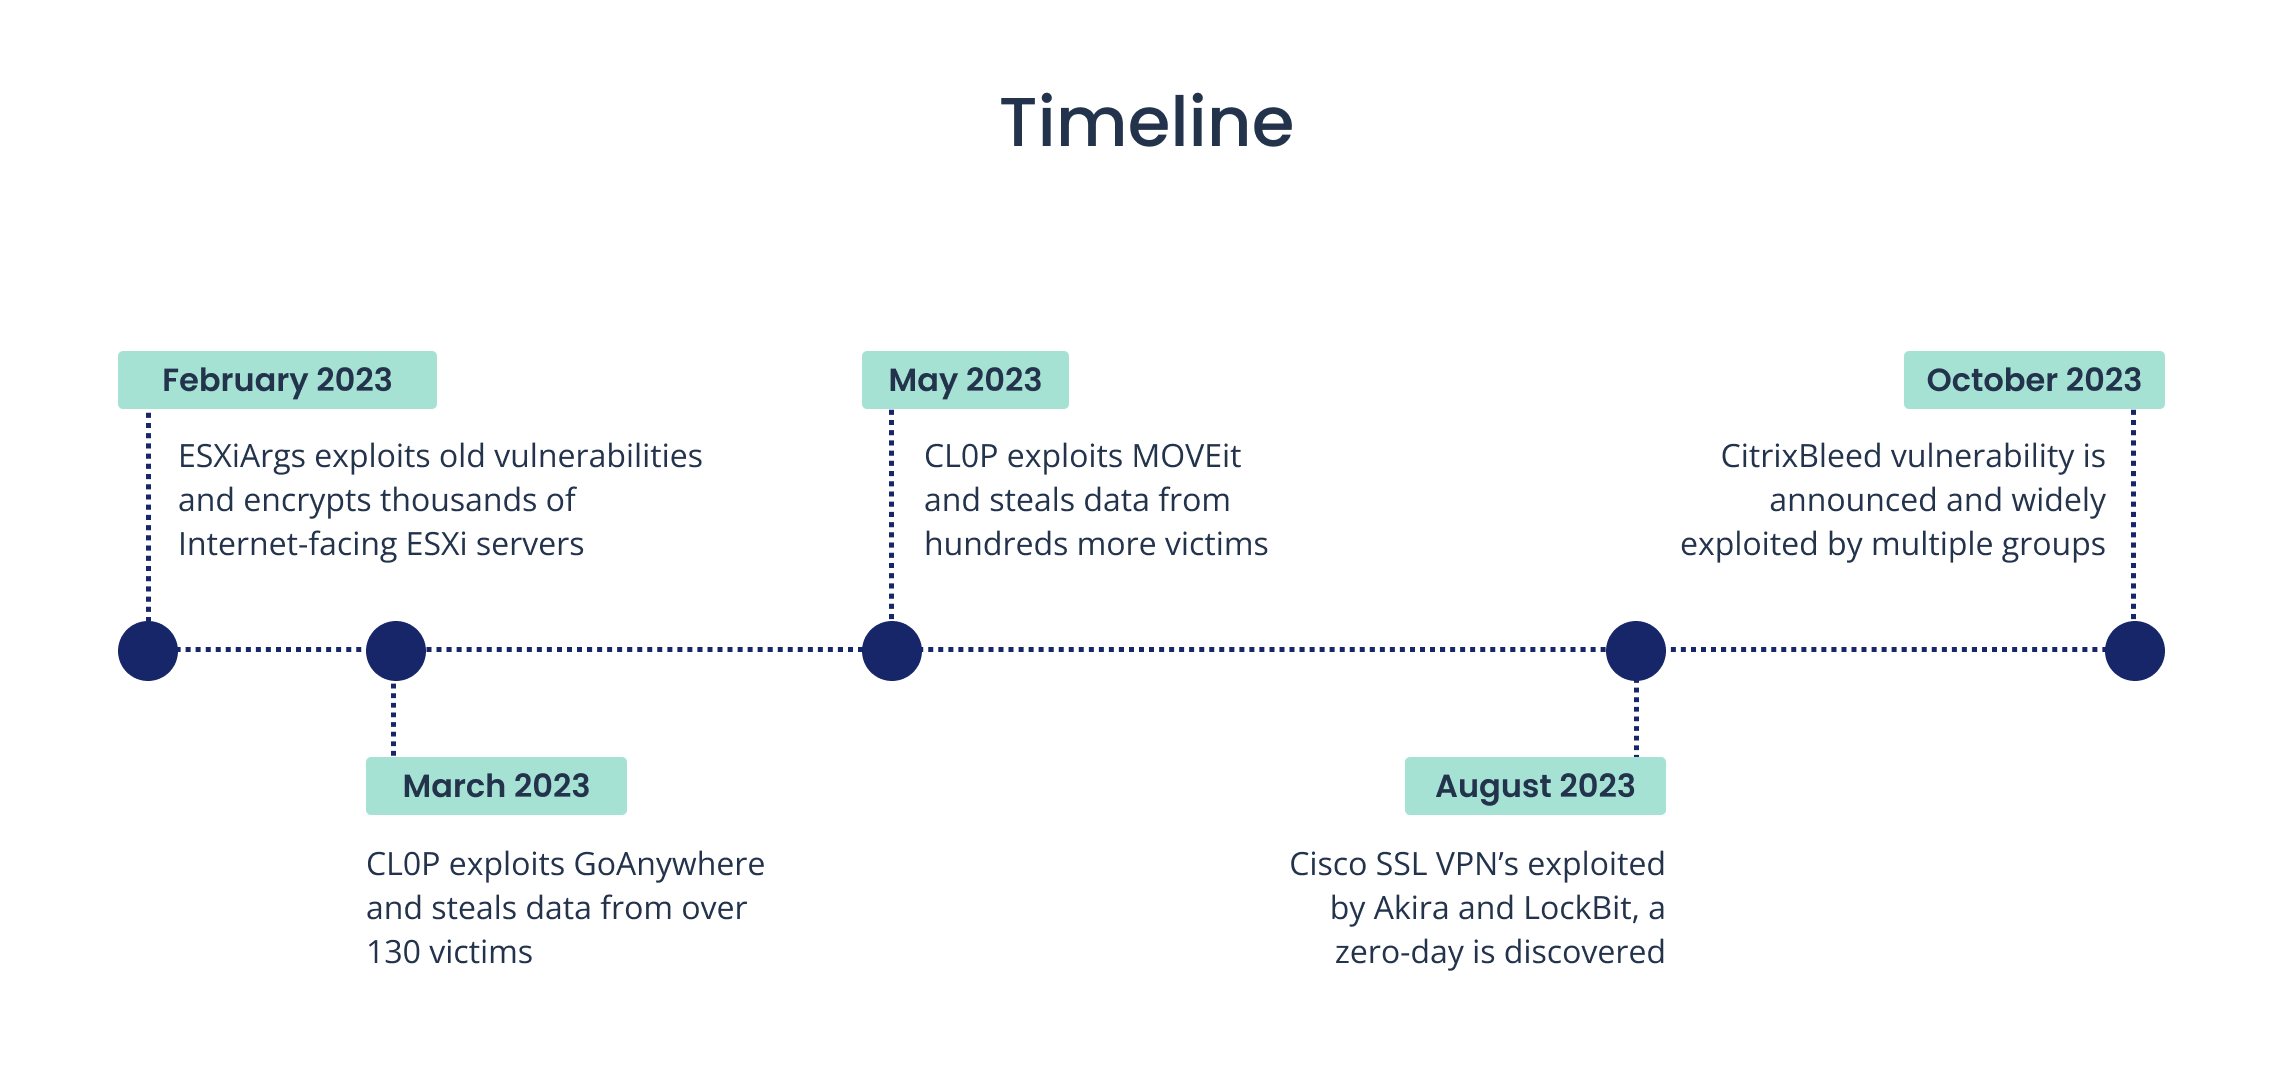 [TIMELINE] Ransomware gang activity from February 2023 to October 2023